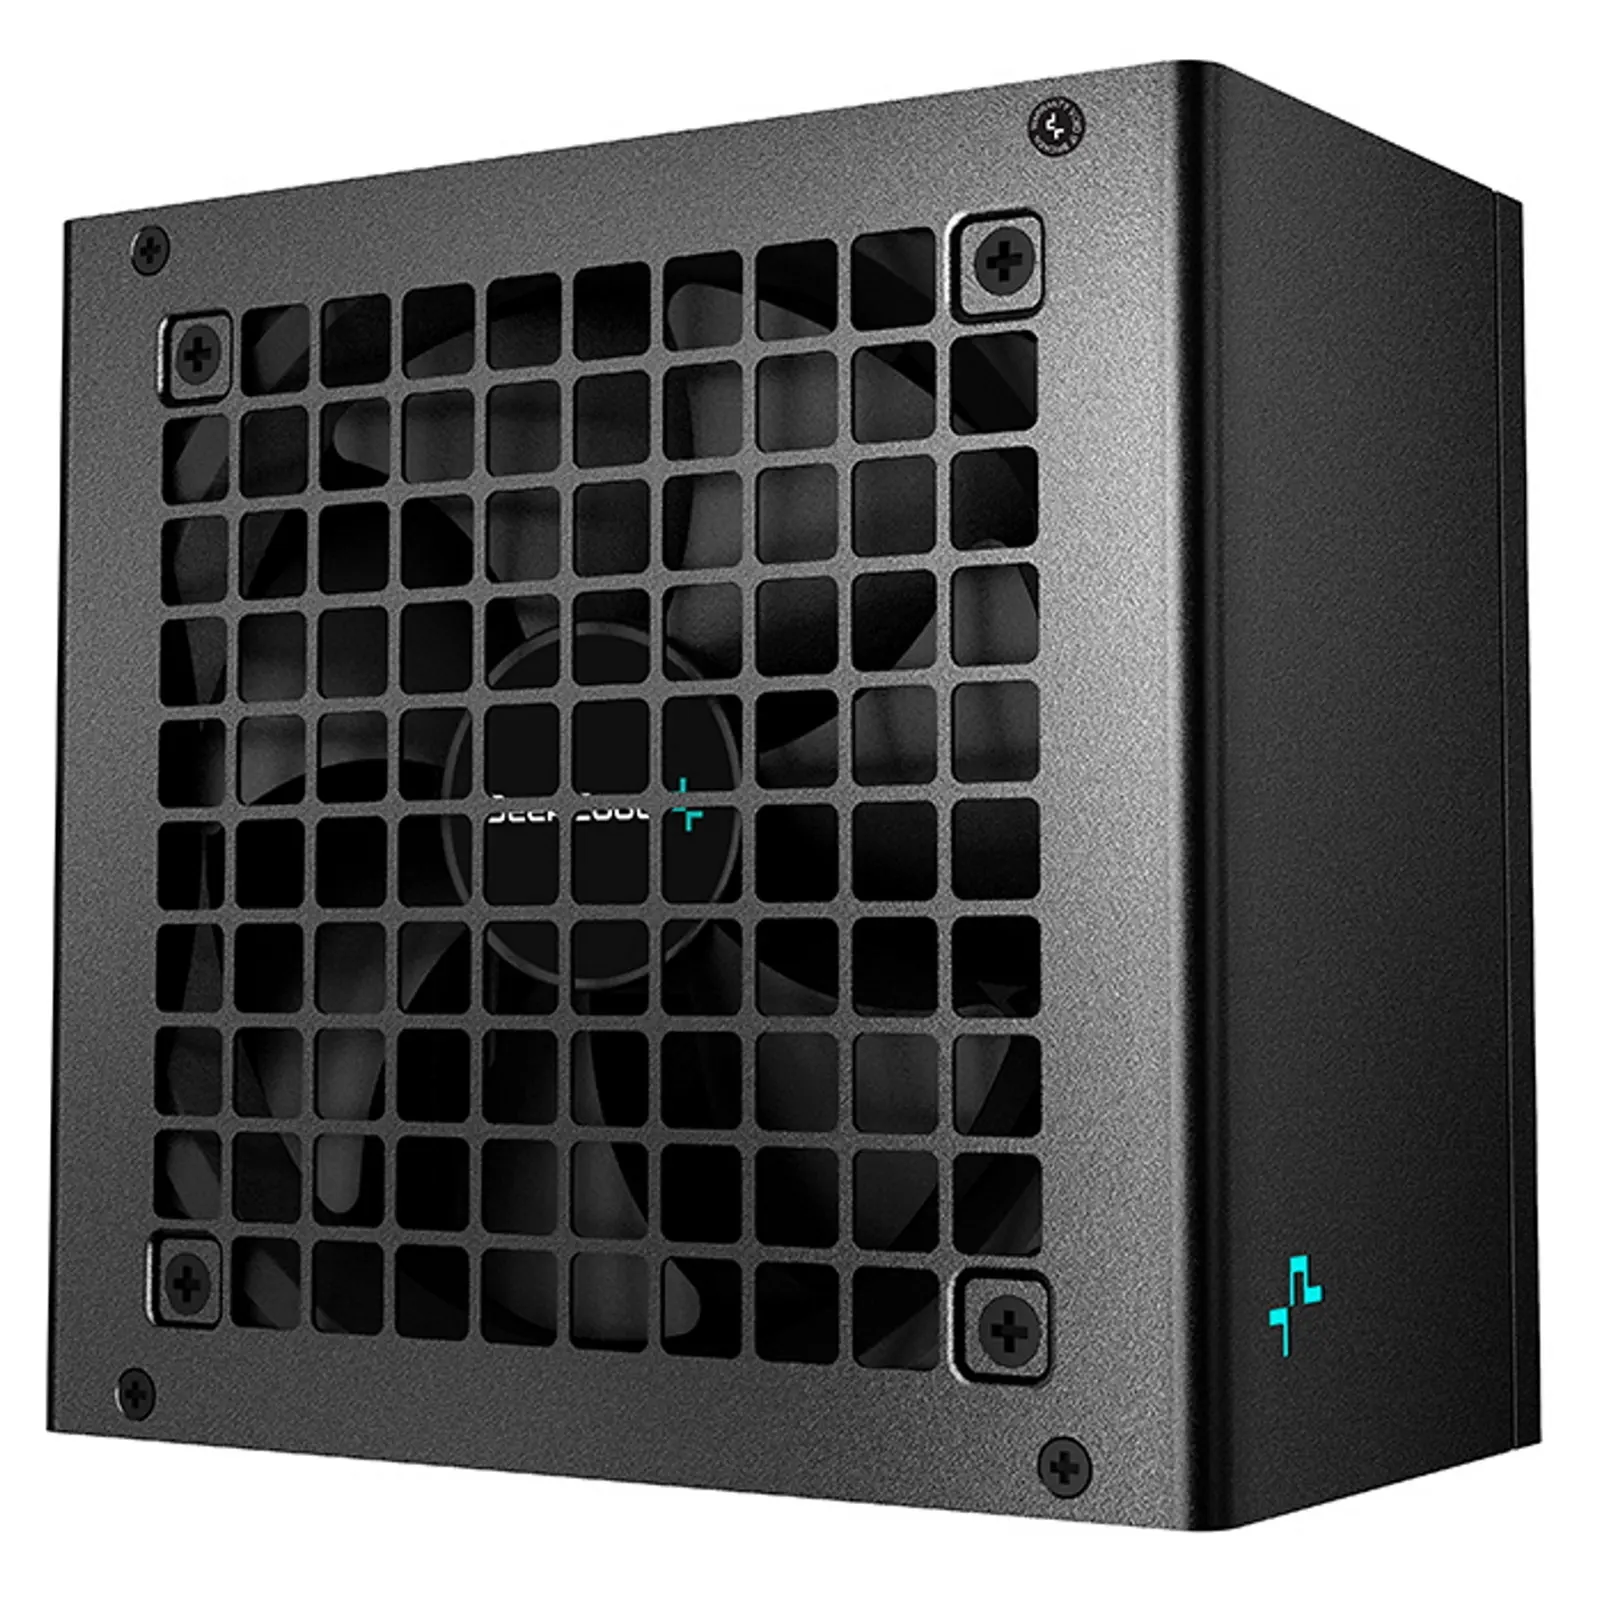 DeepCool PK750D 750W Power Supply Unit, 120mm Silent Hydro Bearing Fan, 80 PLUS Bronze, Non Modular, UK Plug, Flat Black Cables, Stable with Low Noise Performance